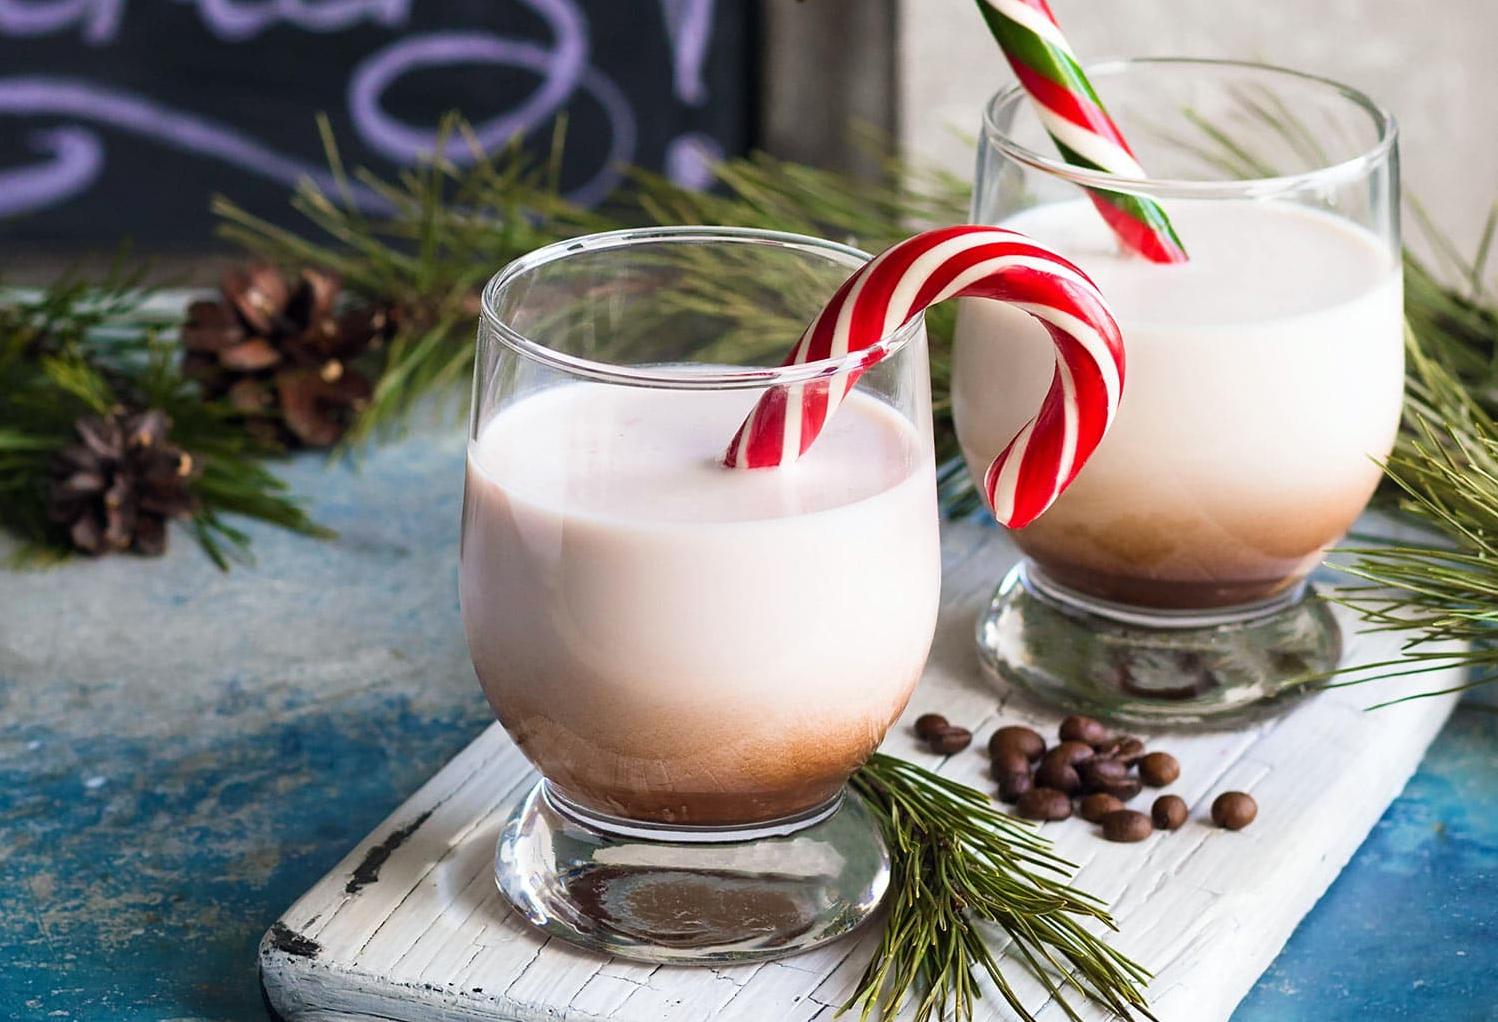  Take a sip of this smooth and velvety Irish cream, and you'll know why it's so popular!